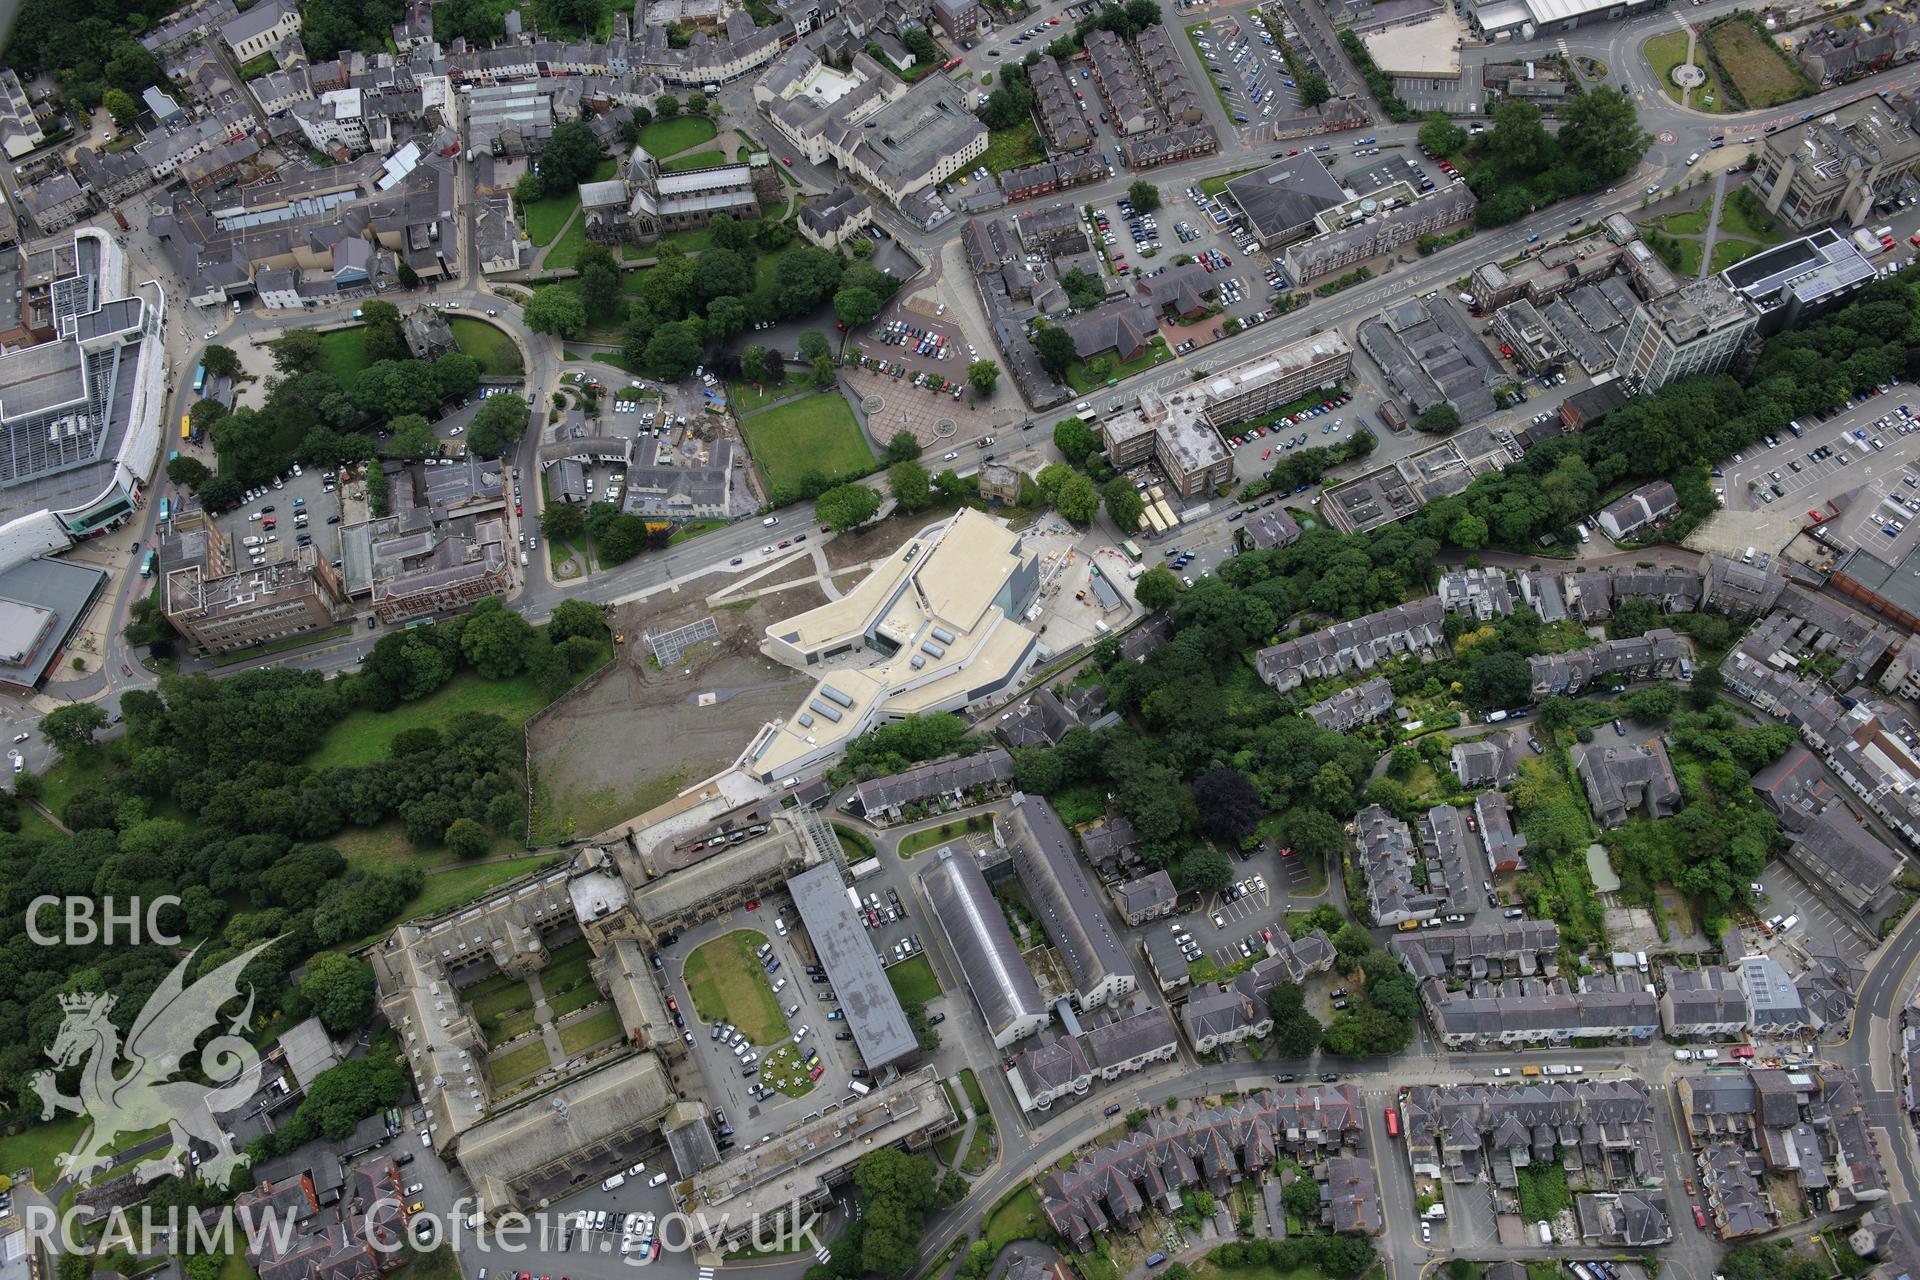 Bangor Cathedral, University, Theatr Gwynedd (demolished),Pontio, medieval church site, town hall and library. Oblique aerial photograph taken during the Royal Commission's programme of archaeological aerial reconnaissance by Toby Driver on 30th July 2015.